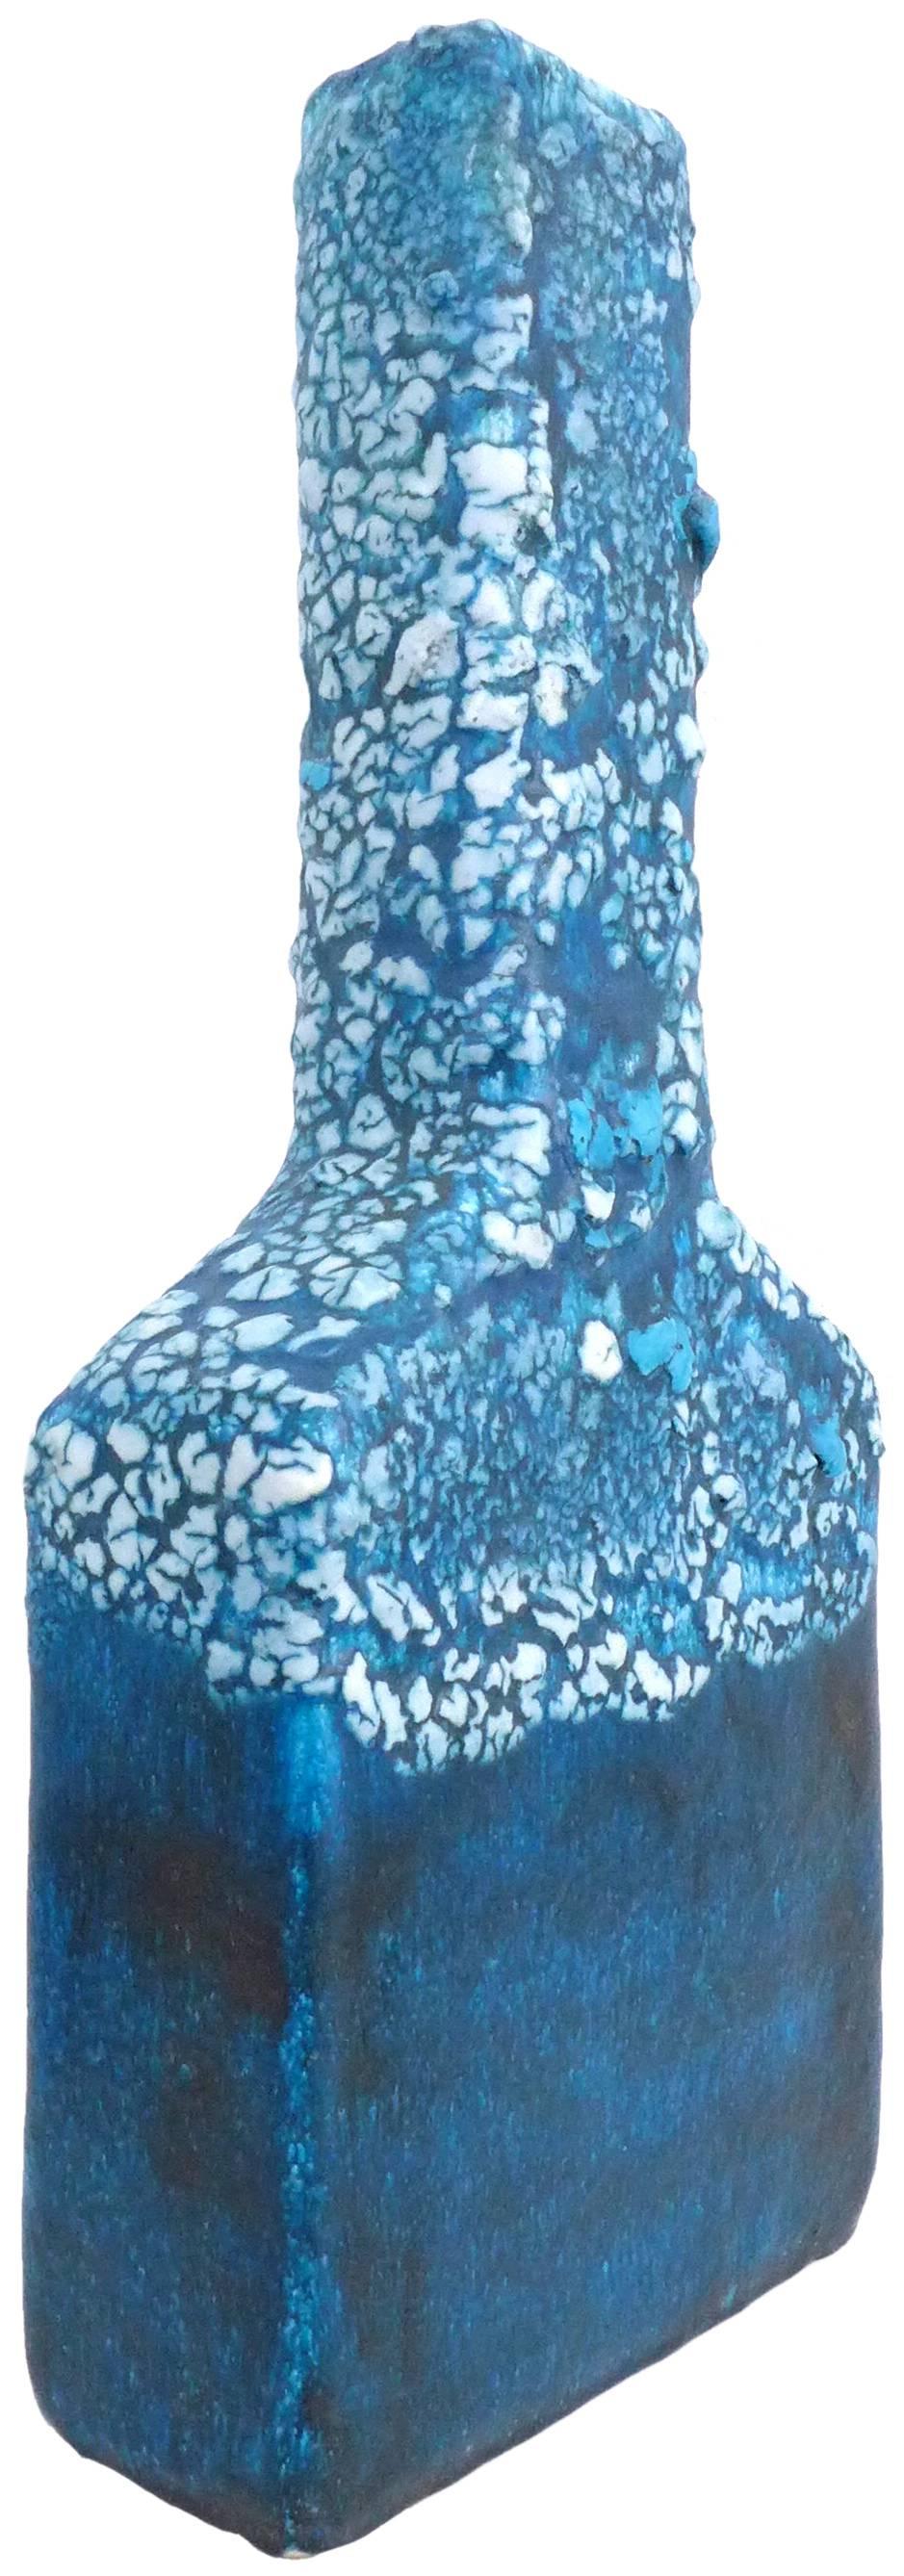 A fantastic ceramic vase by the celebrated Italian ceramicist Guido Gambone. An impressively-scaled and -executed, two-toned, simple, architectural form; the lower half a rich glaze of classic-Gambone deep sea blue with a top half in an